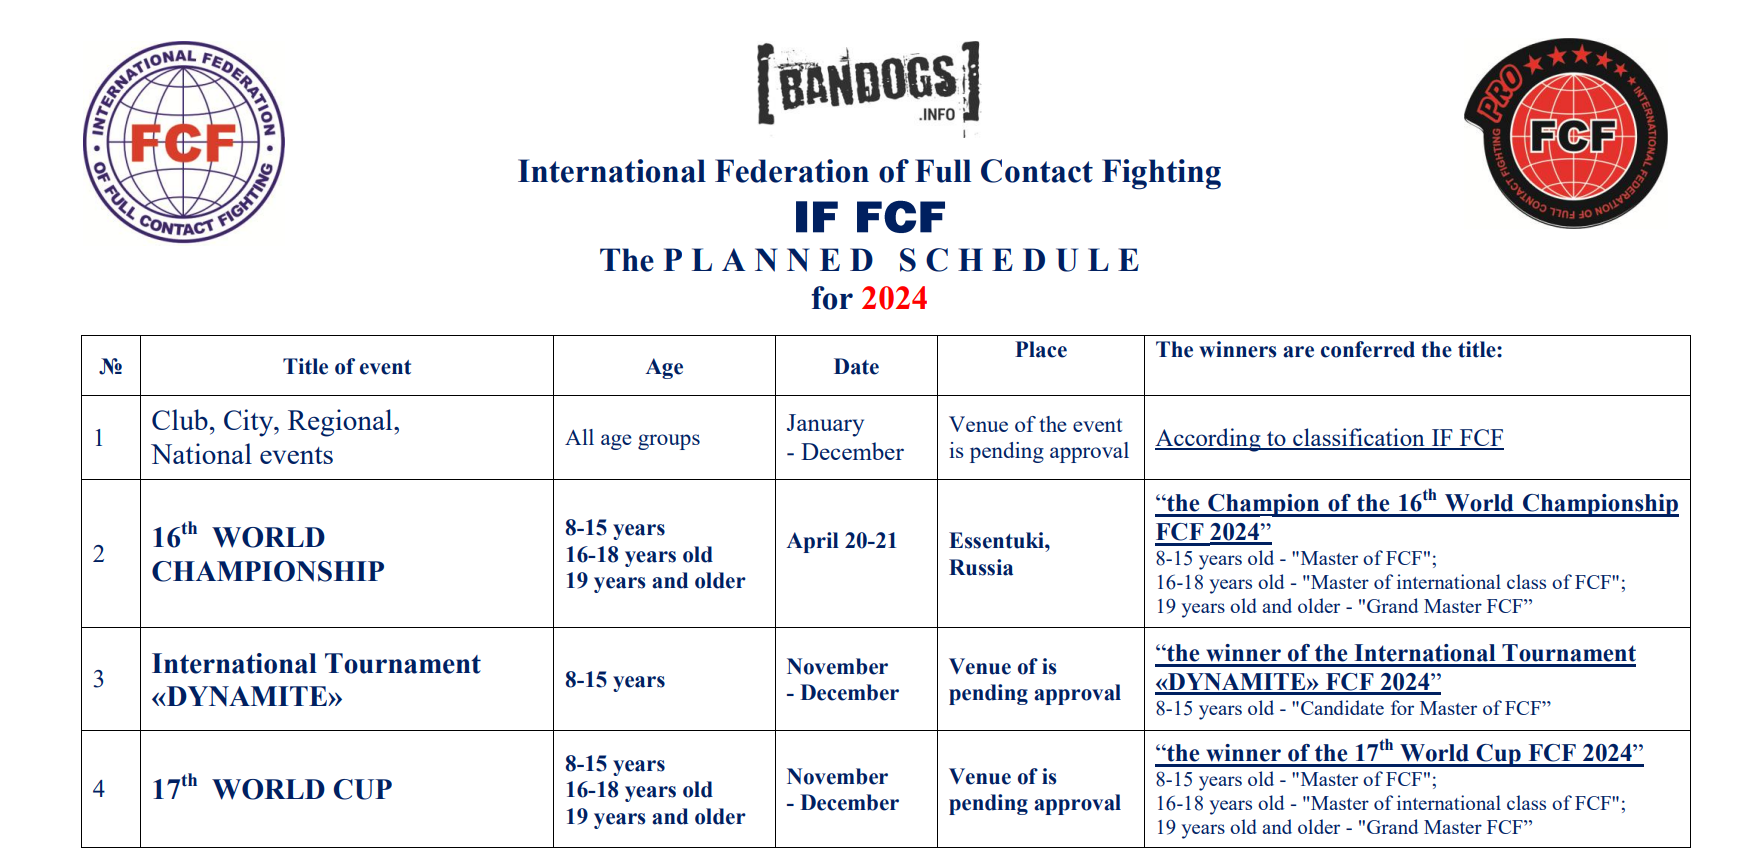 IF FCF Planned Schedule for 2023